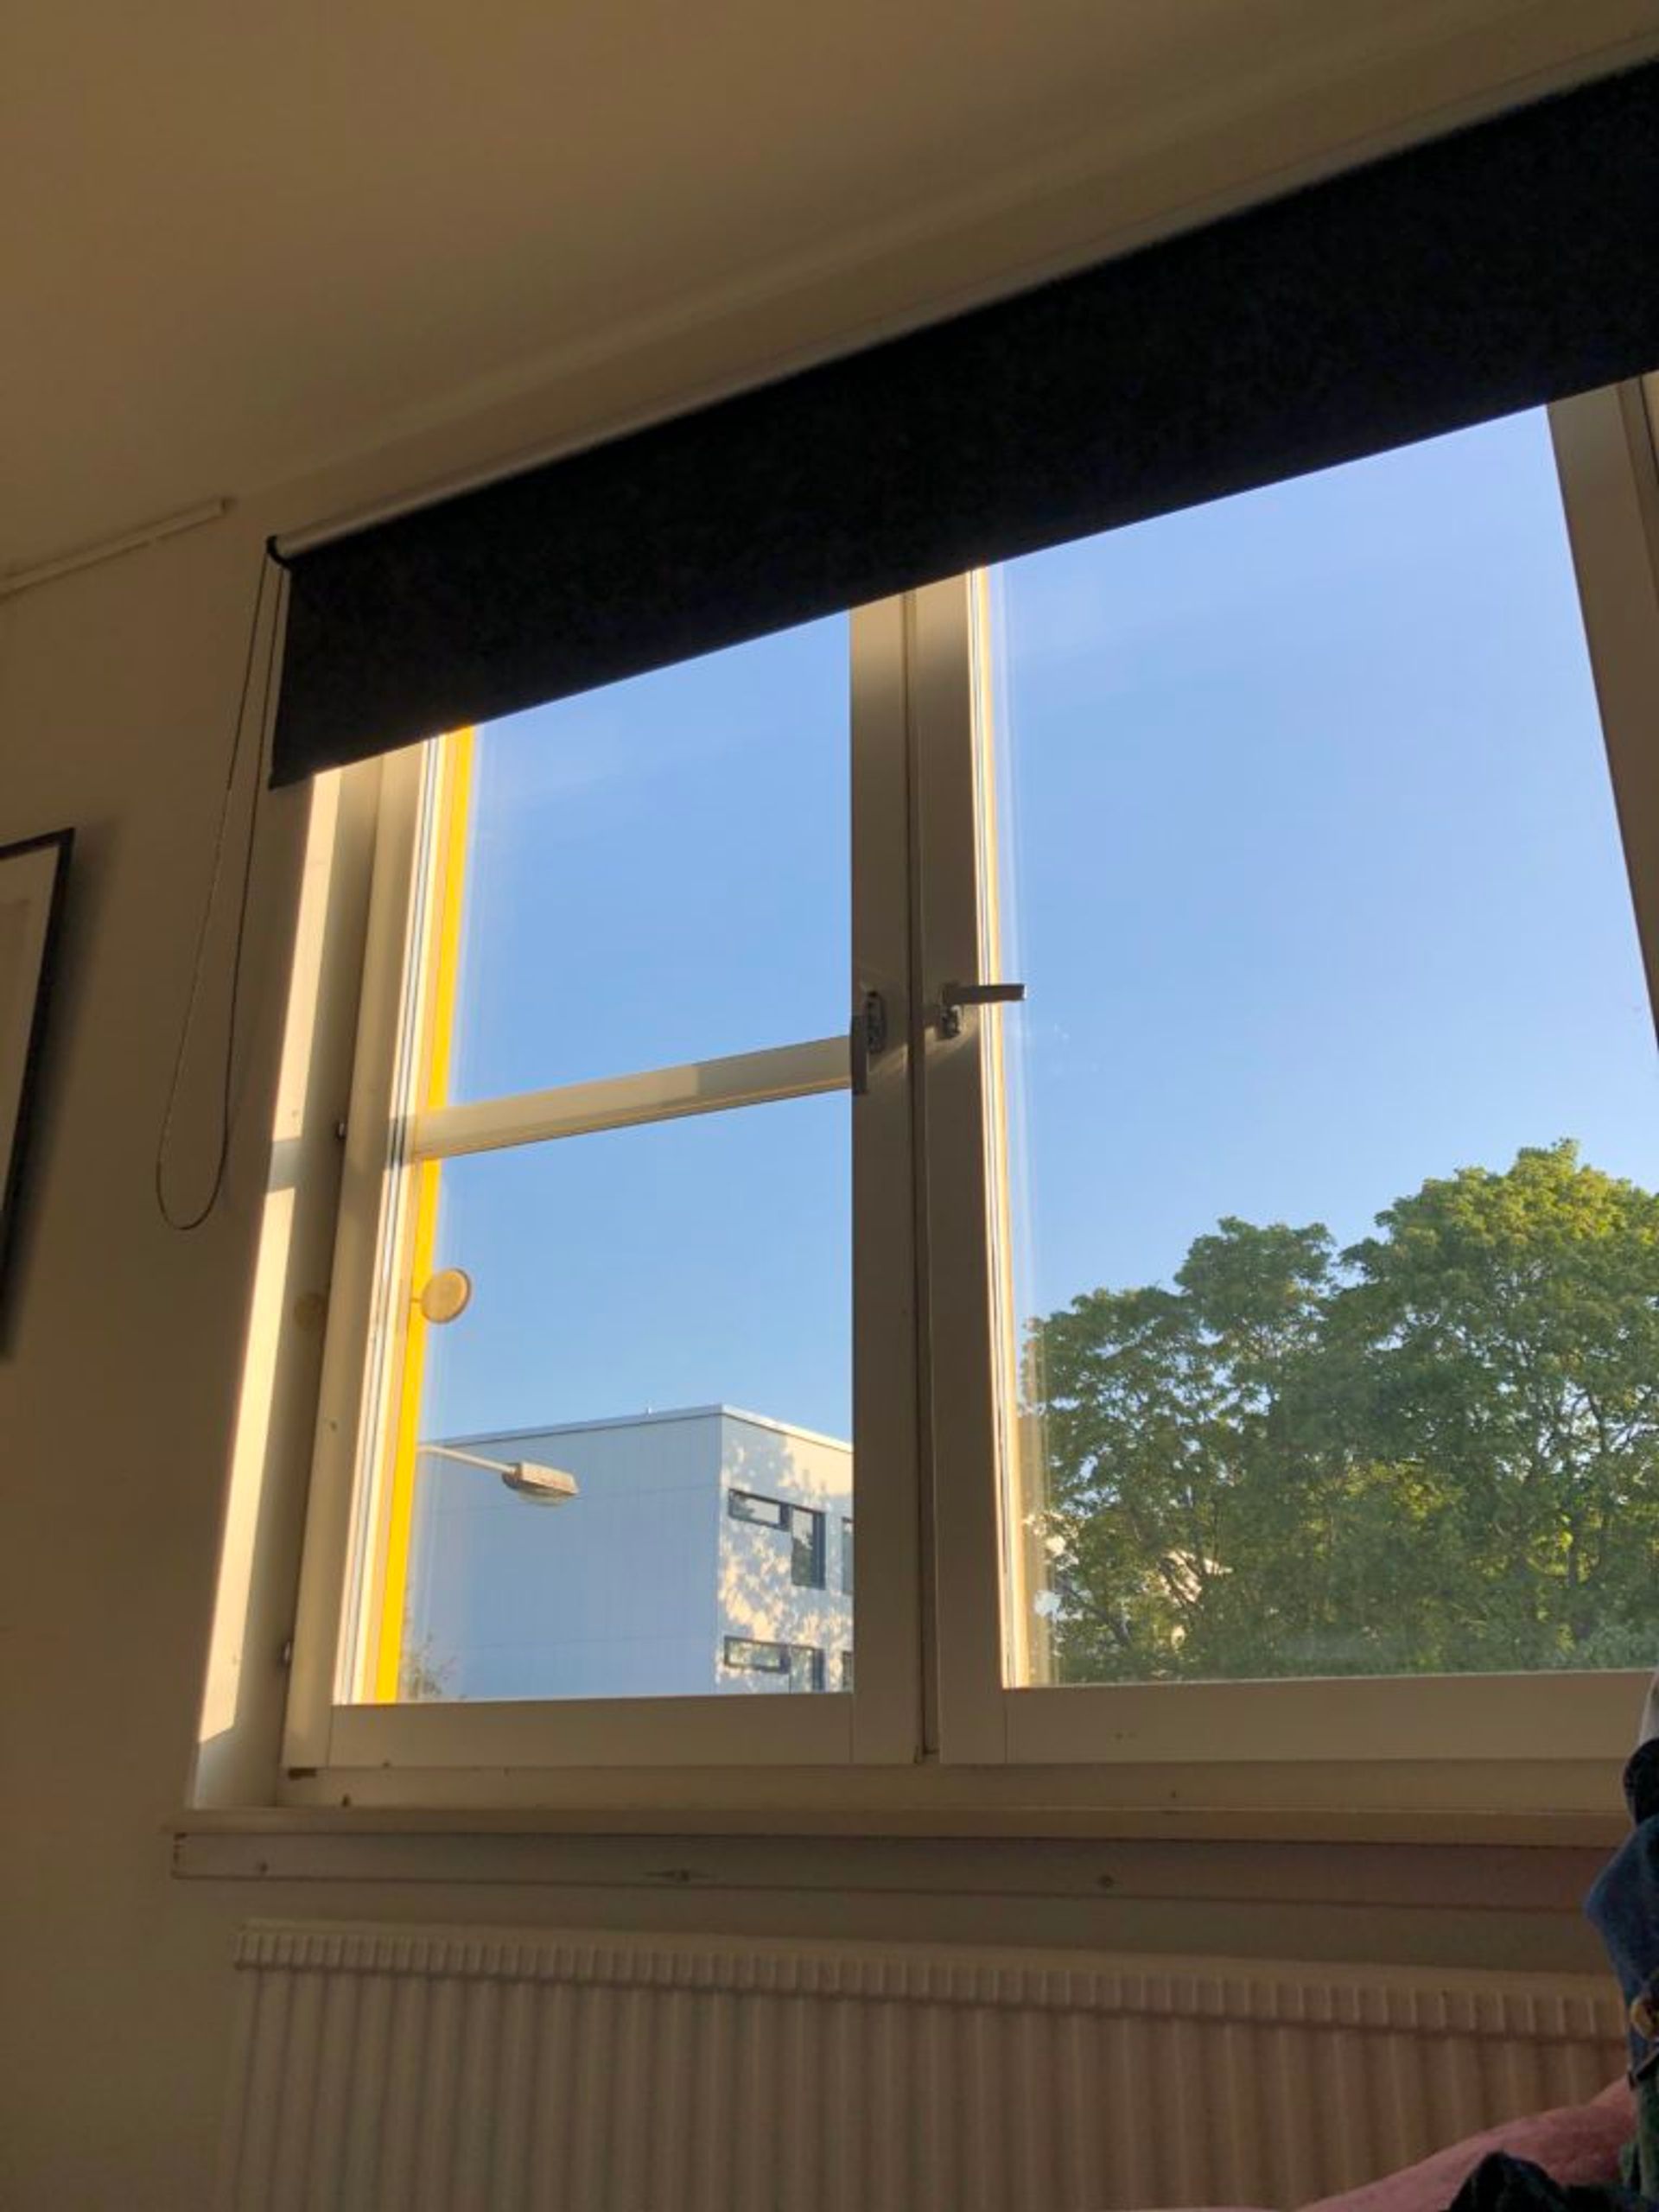 A student room in early August morning 